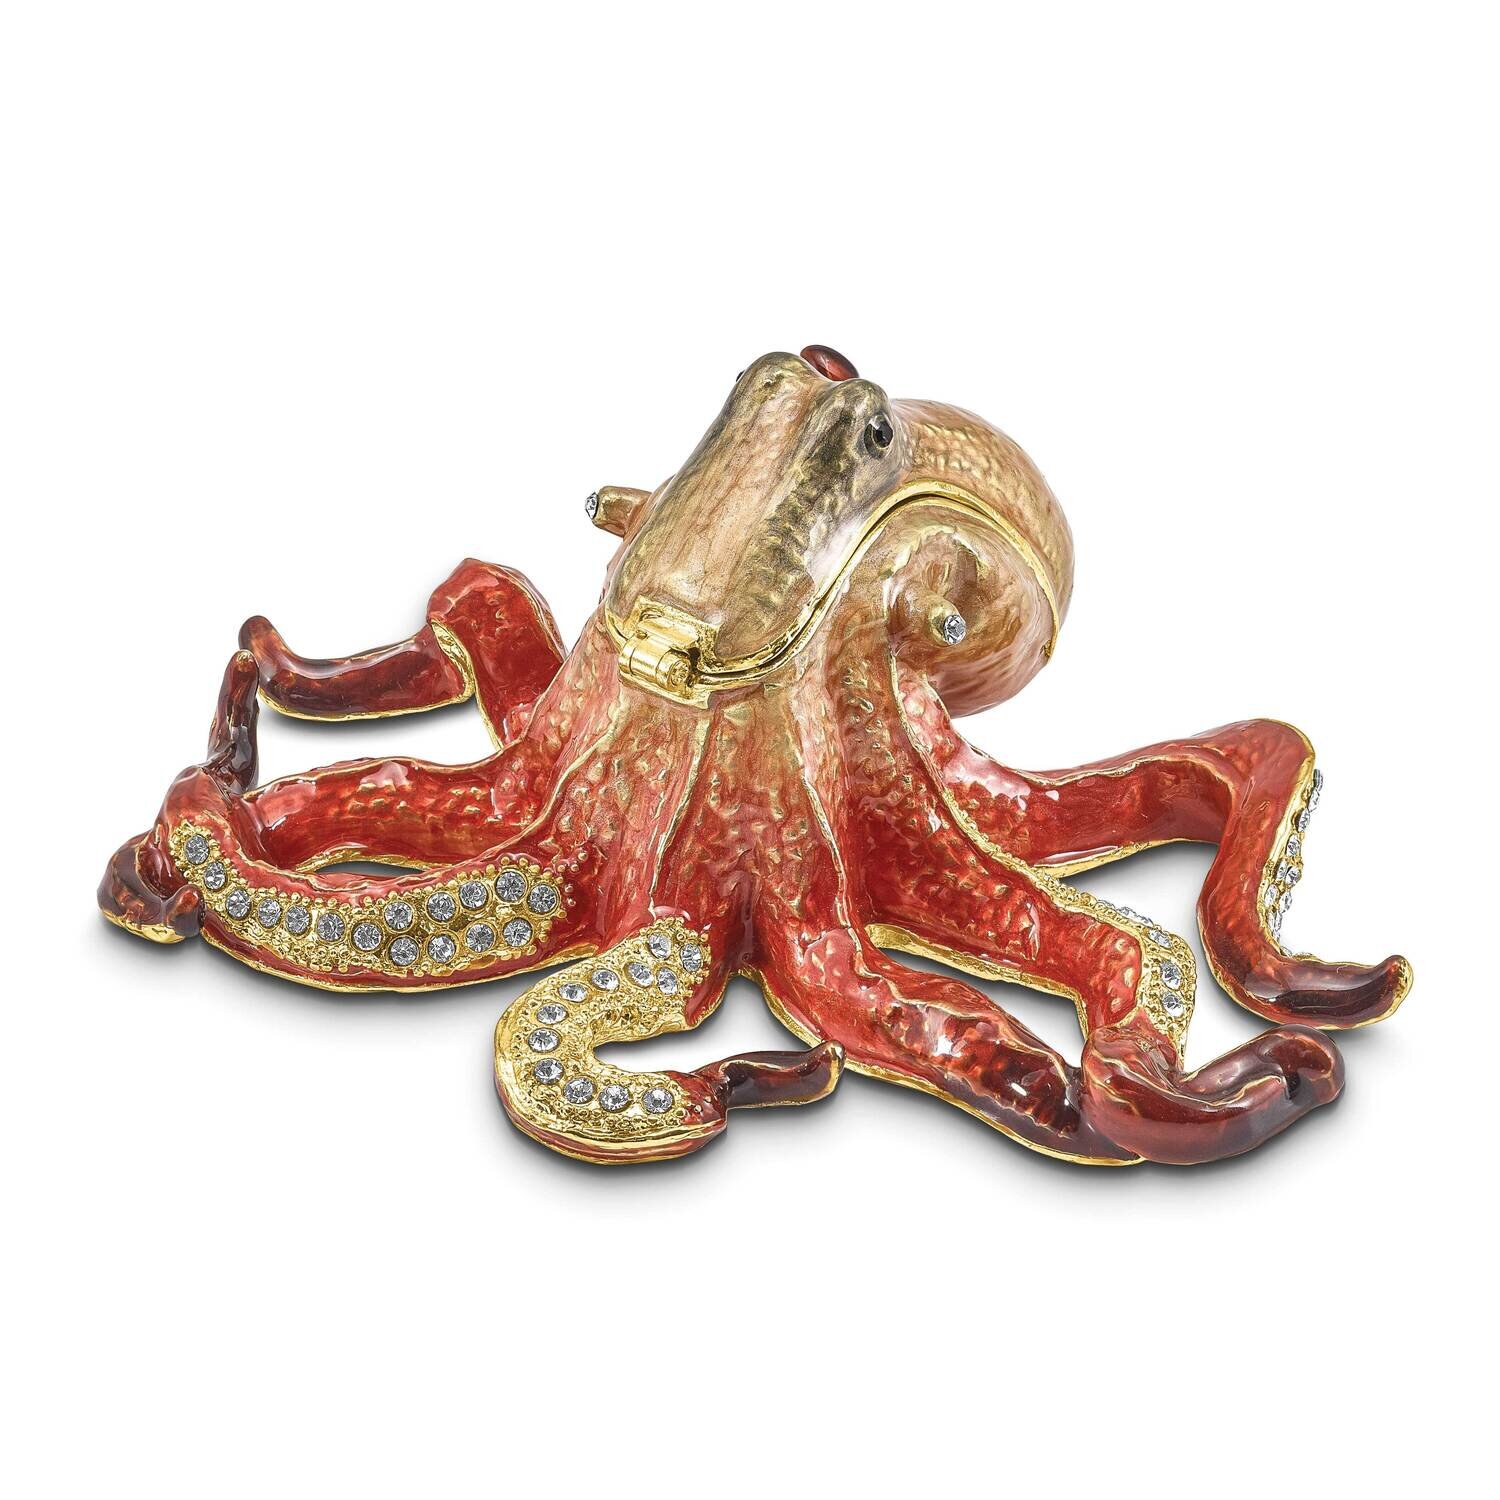 By Jere OLA Octopus Trinket Box with Matching 18 Inch Necklace Pewter Bejeweled Crystals Gold-tone Enameled BJ4129